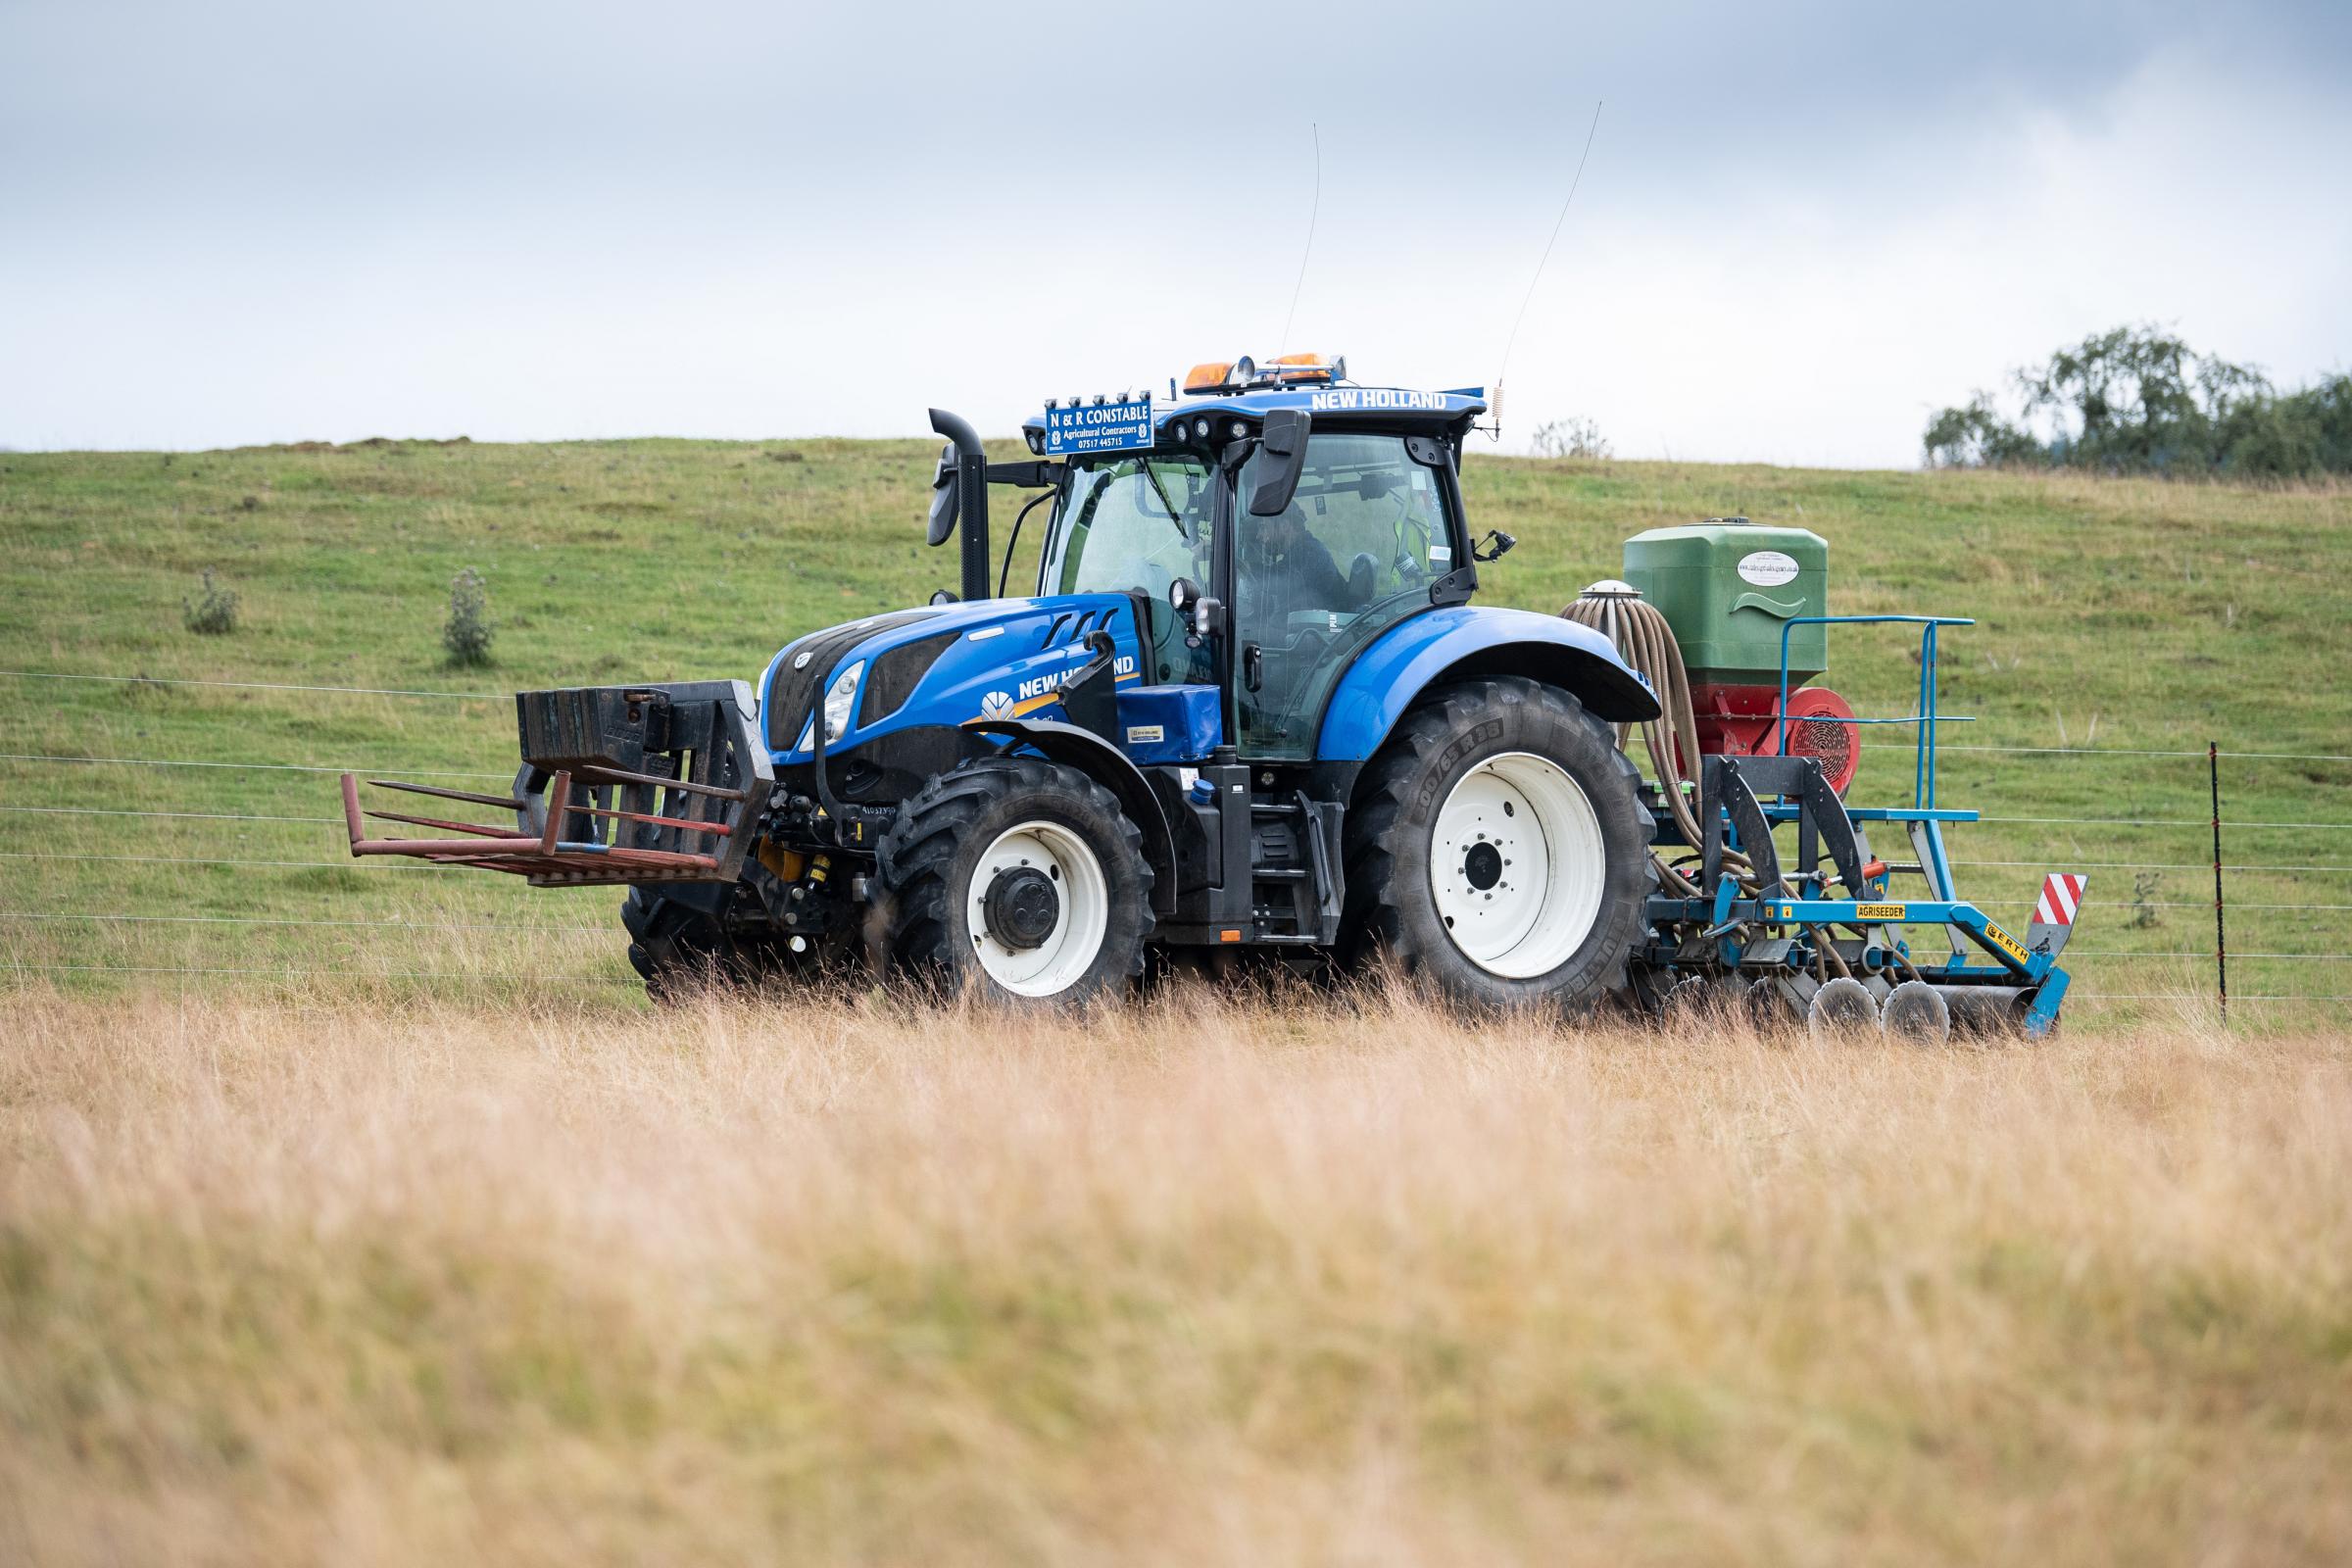 New Holland T6.180 with Erth Engineerings Agriseeder Seed Drill, Direct drilling turnips for winter fodder for deer herd Ref:RH270721073 Rob Haining / The Scottish Farmer